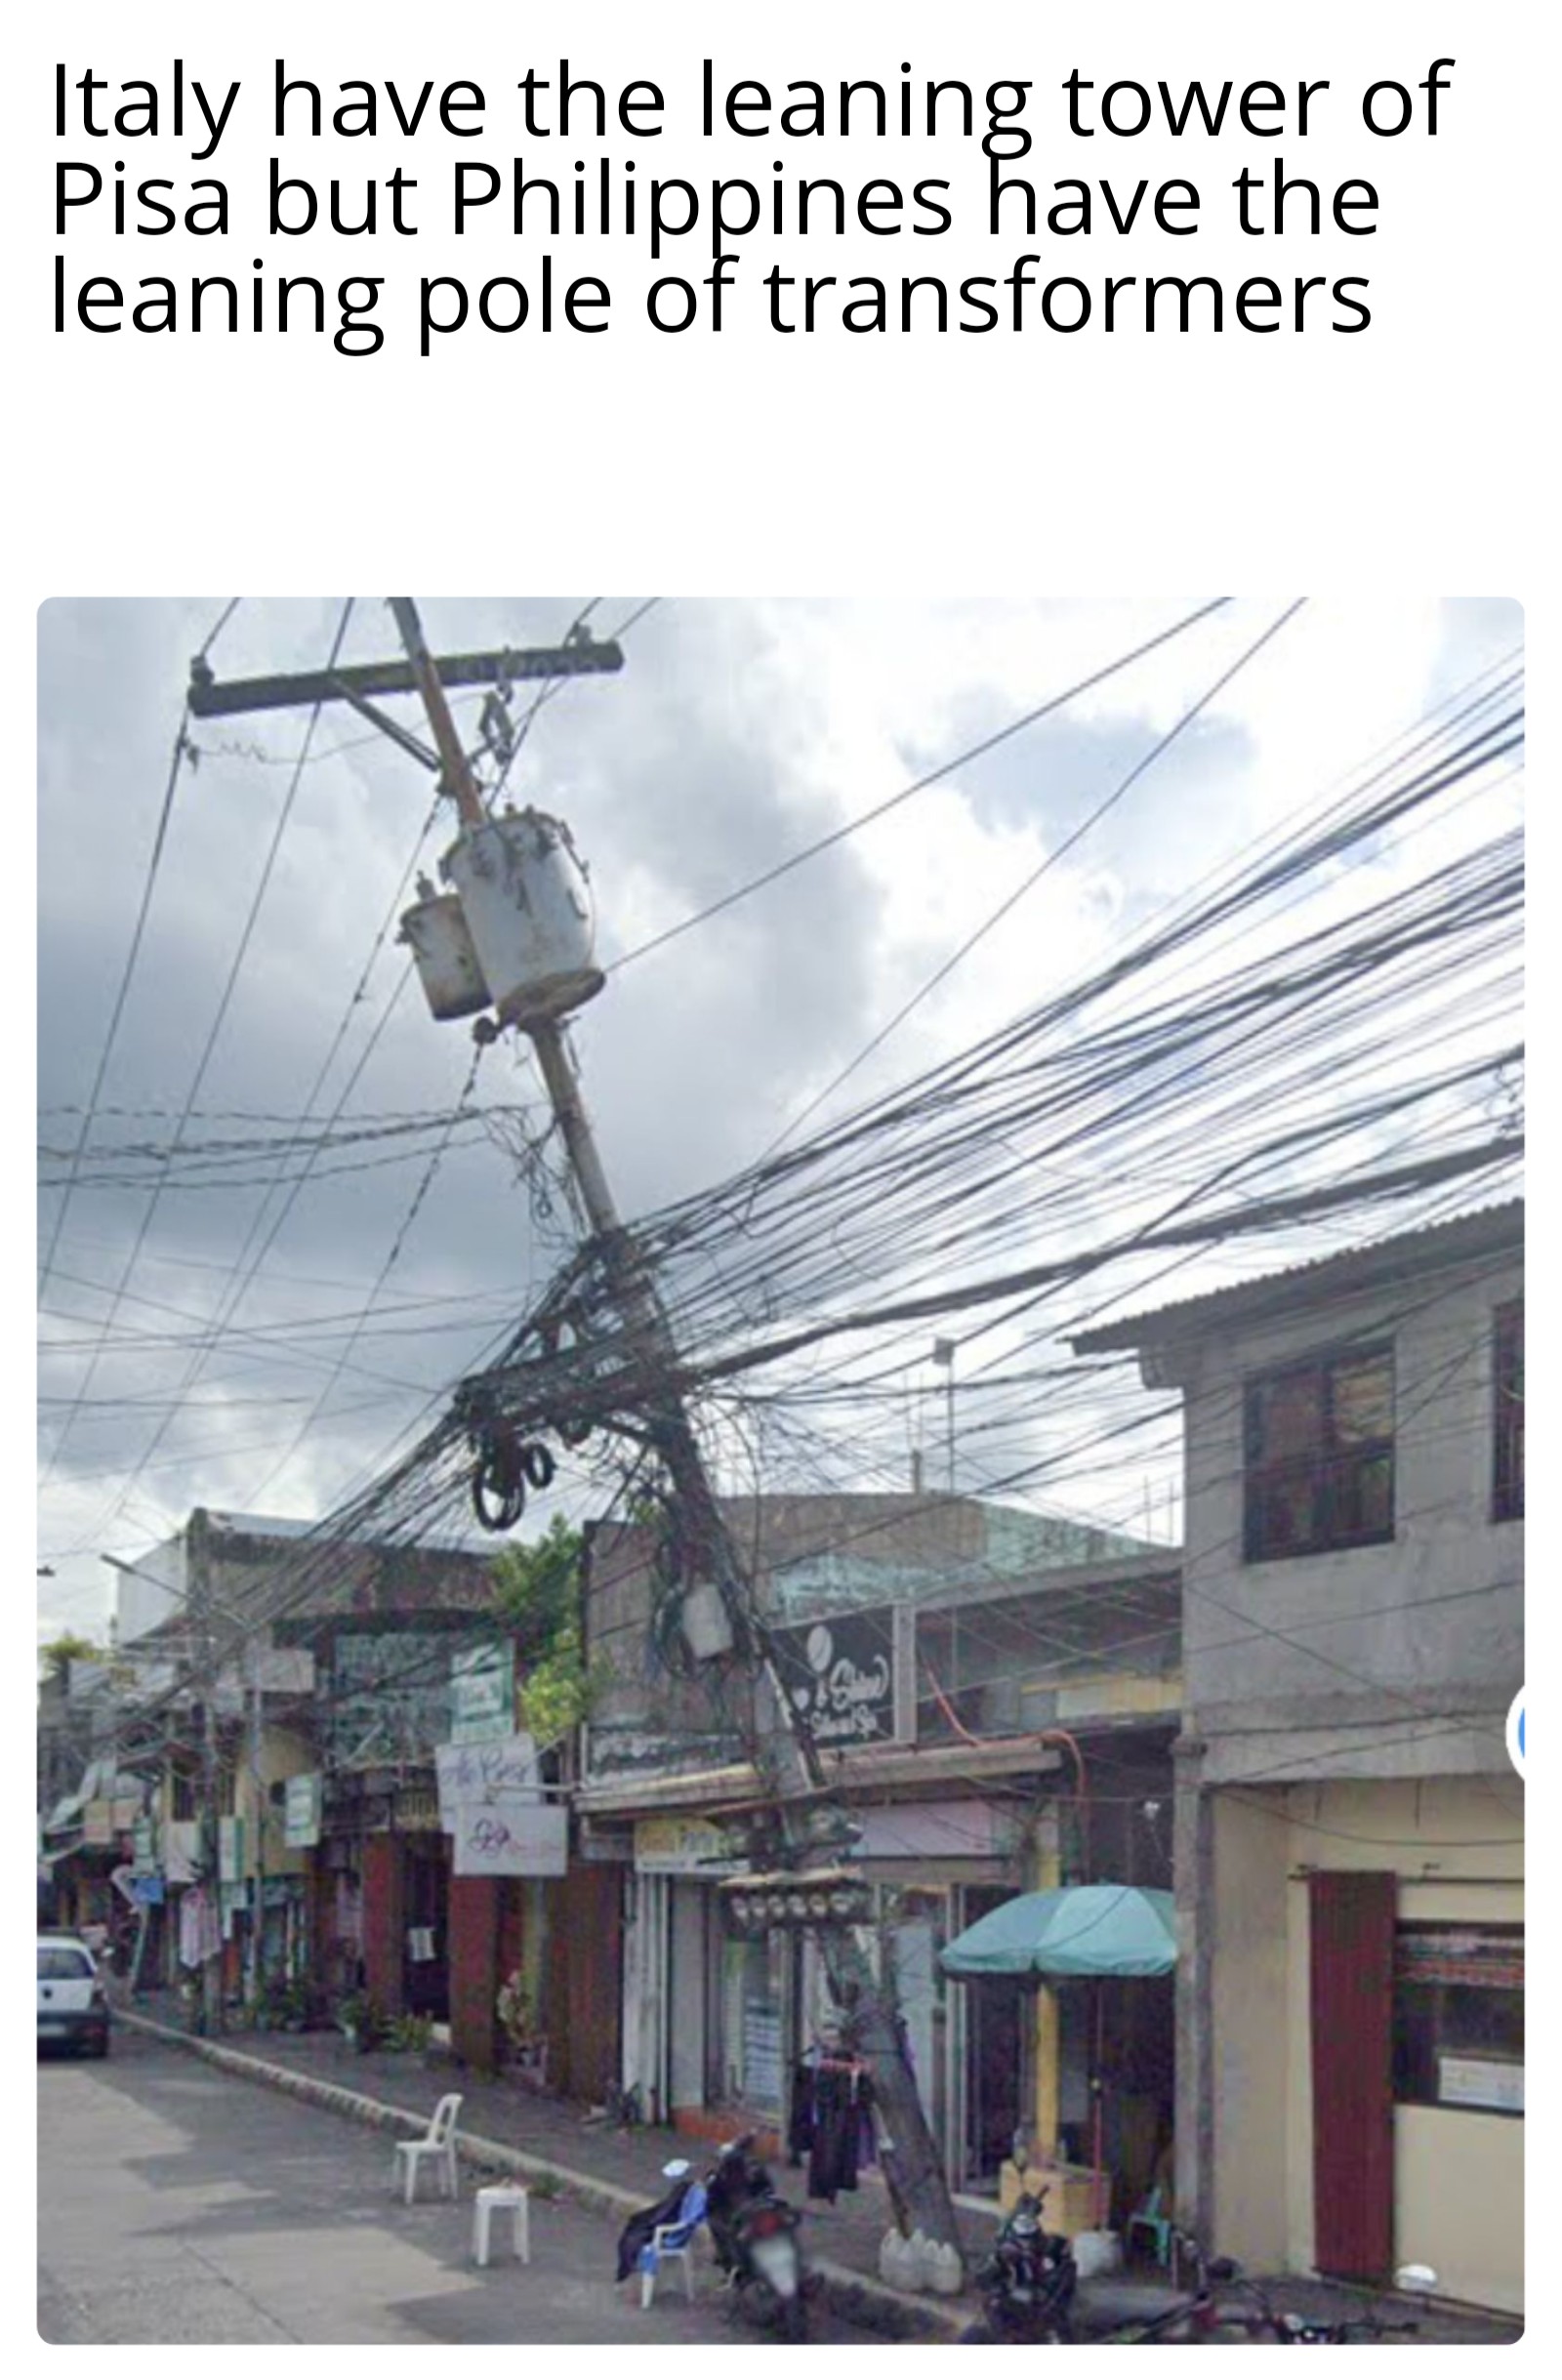 funny memes- public utility - Italy have the leaning tower of Pisa but Philippines have the leaning pole of transformers